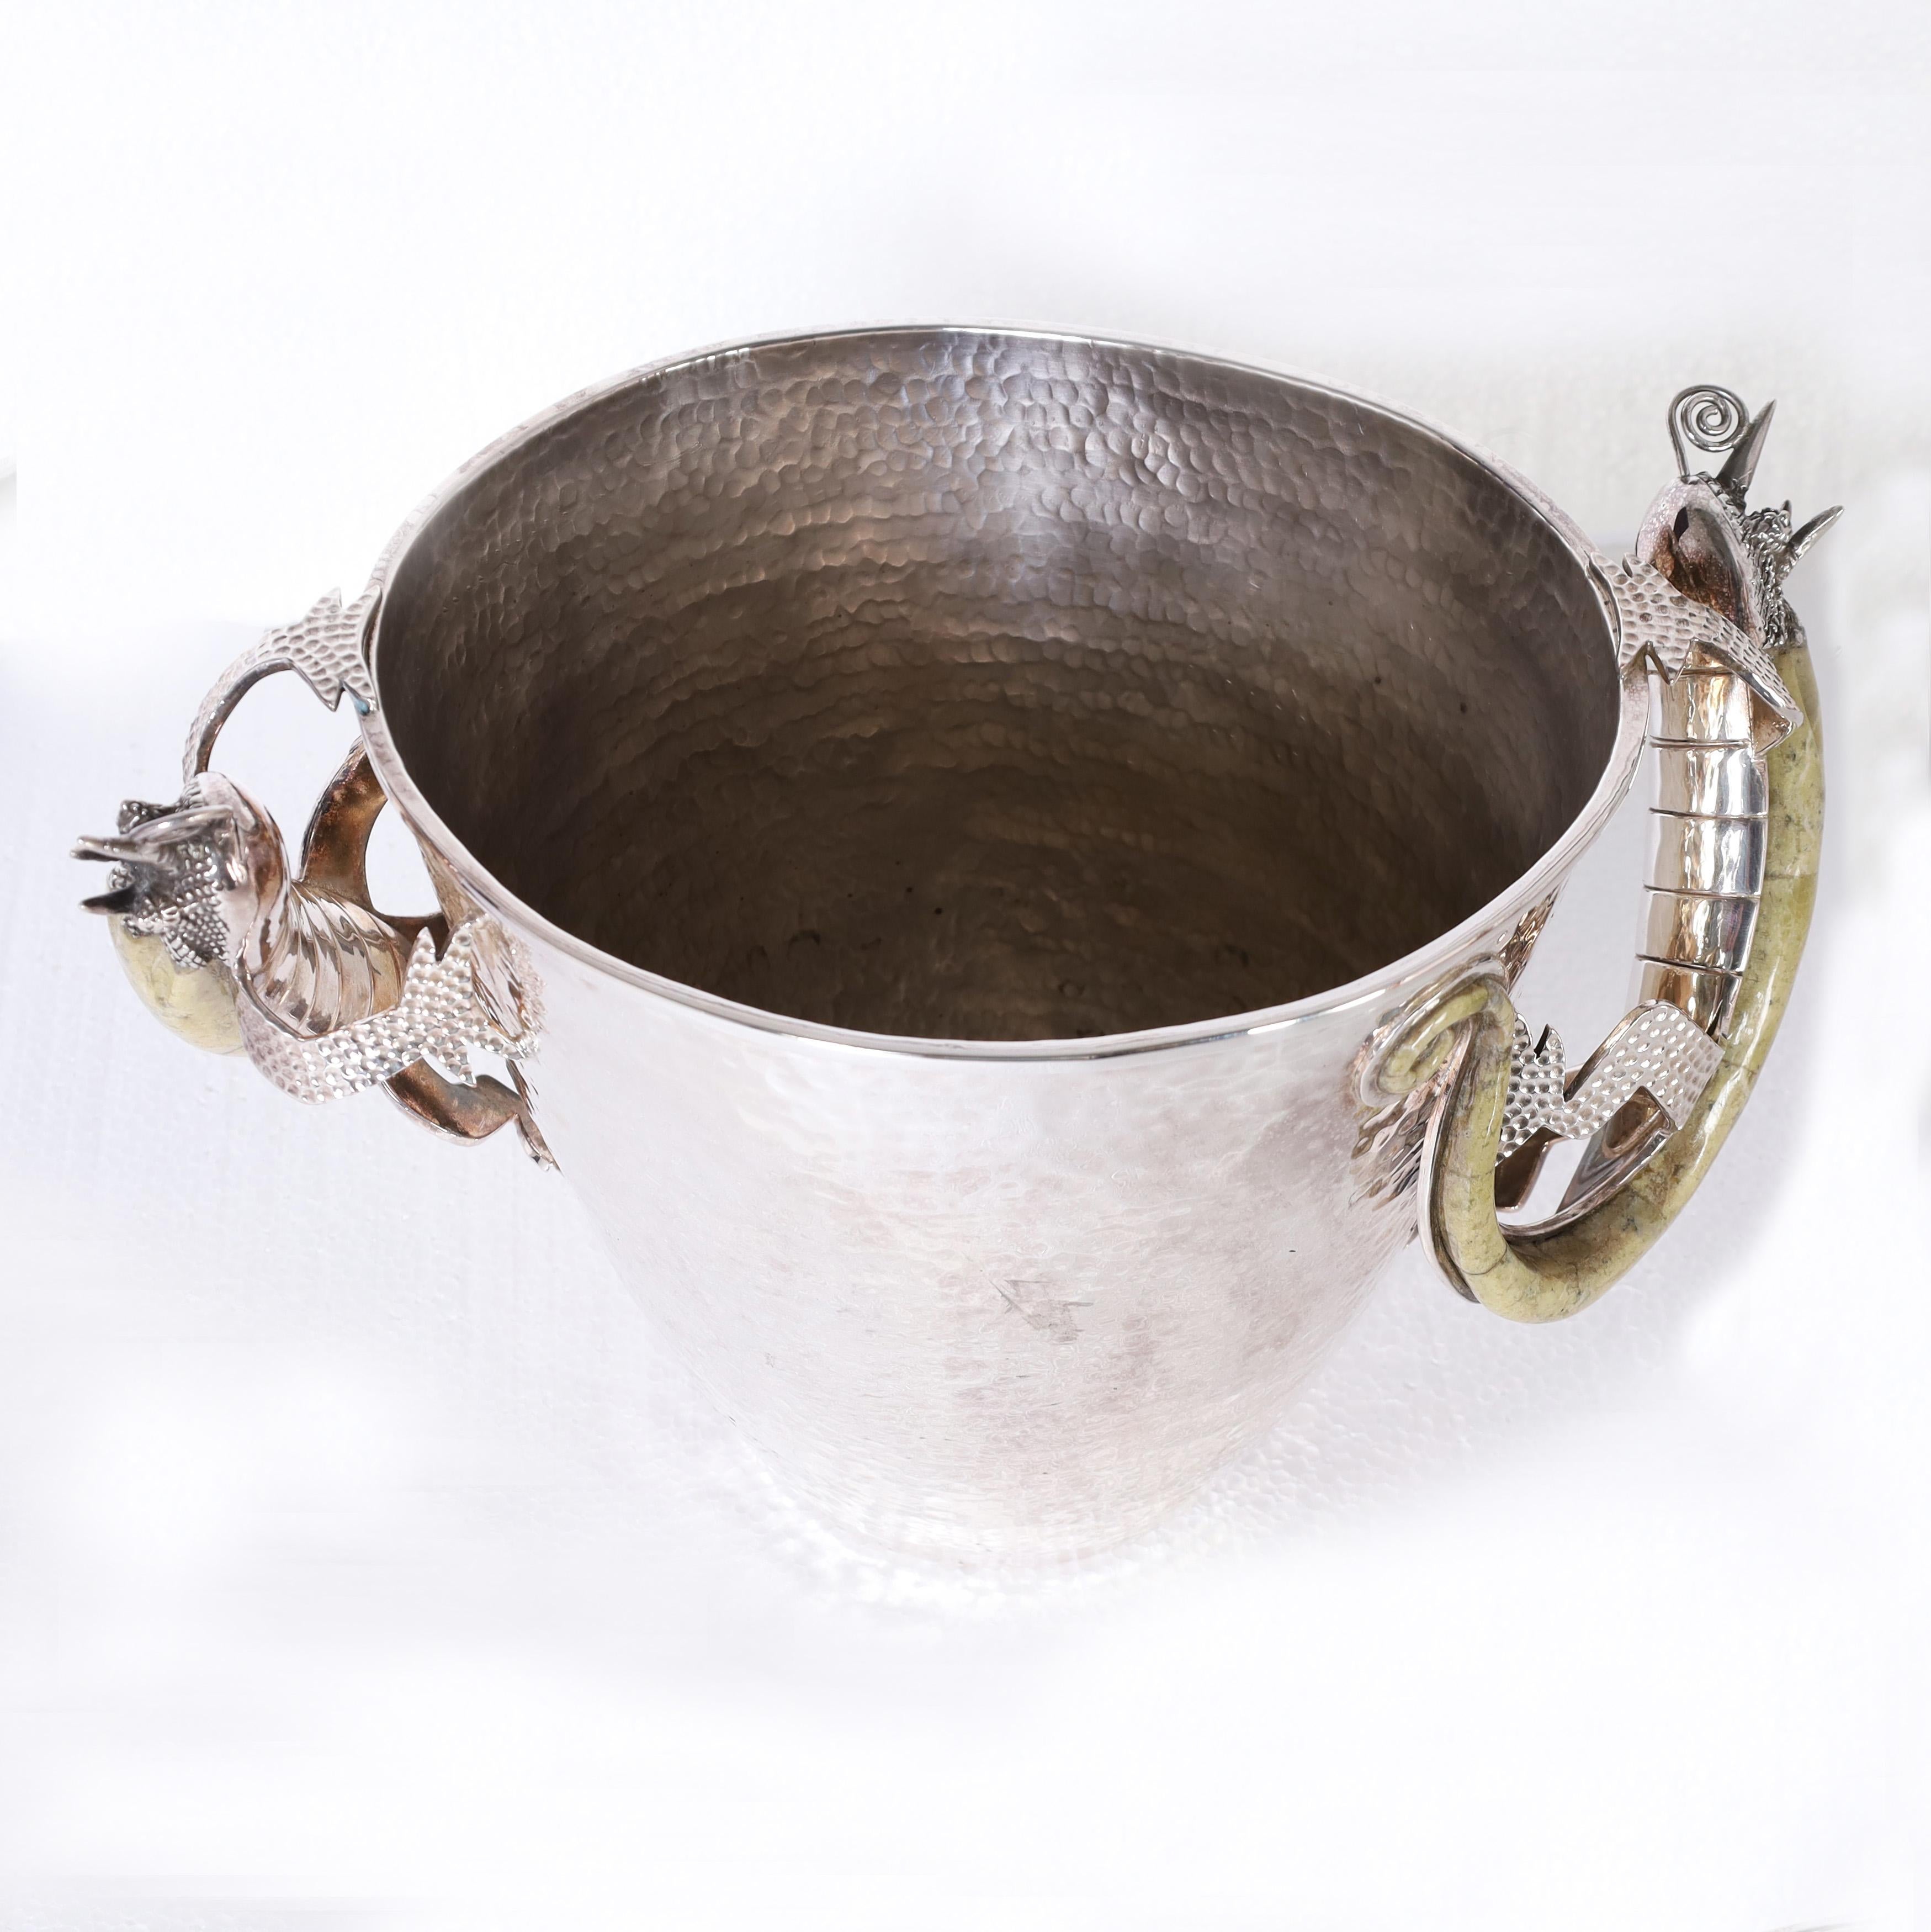 Standout vintage ice bucket handcrafted in hammered copper under silver plate in modern form featuring stone clad lizards as handles. Stamped Los Castillo 1967 on the bottom.